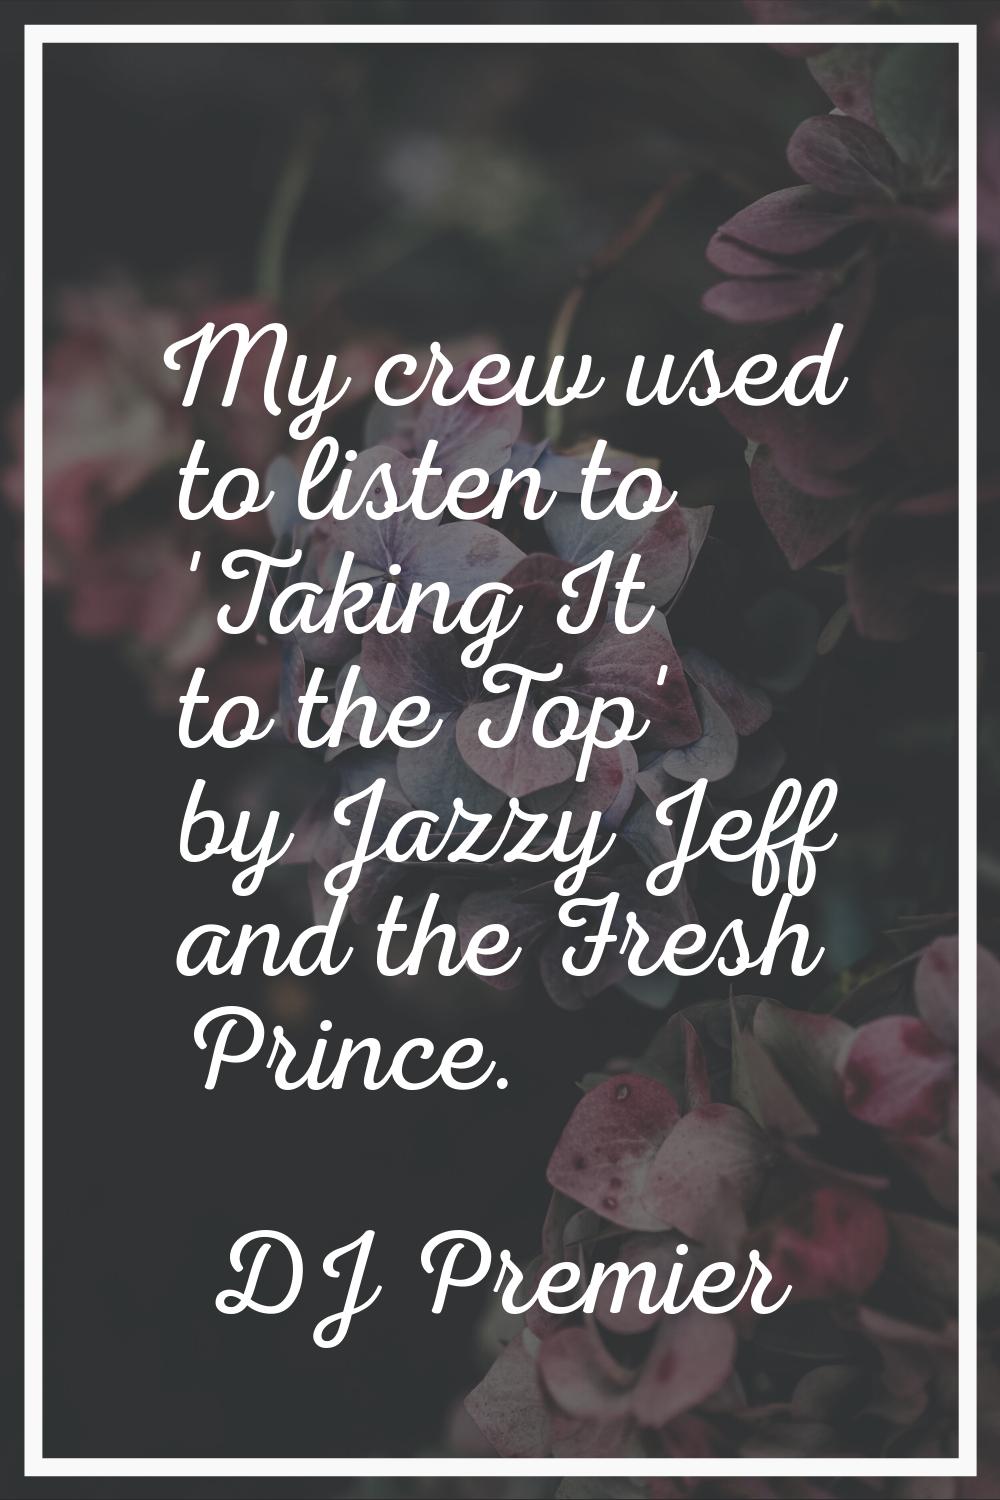 My crew used to listen to 'Taking It to the Top' by Jazzy Jeff and the Fresh Prince.